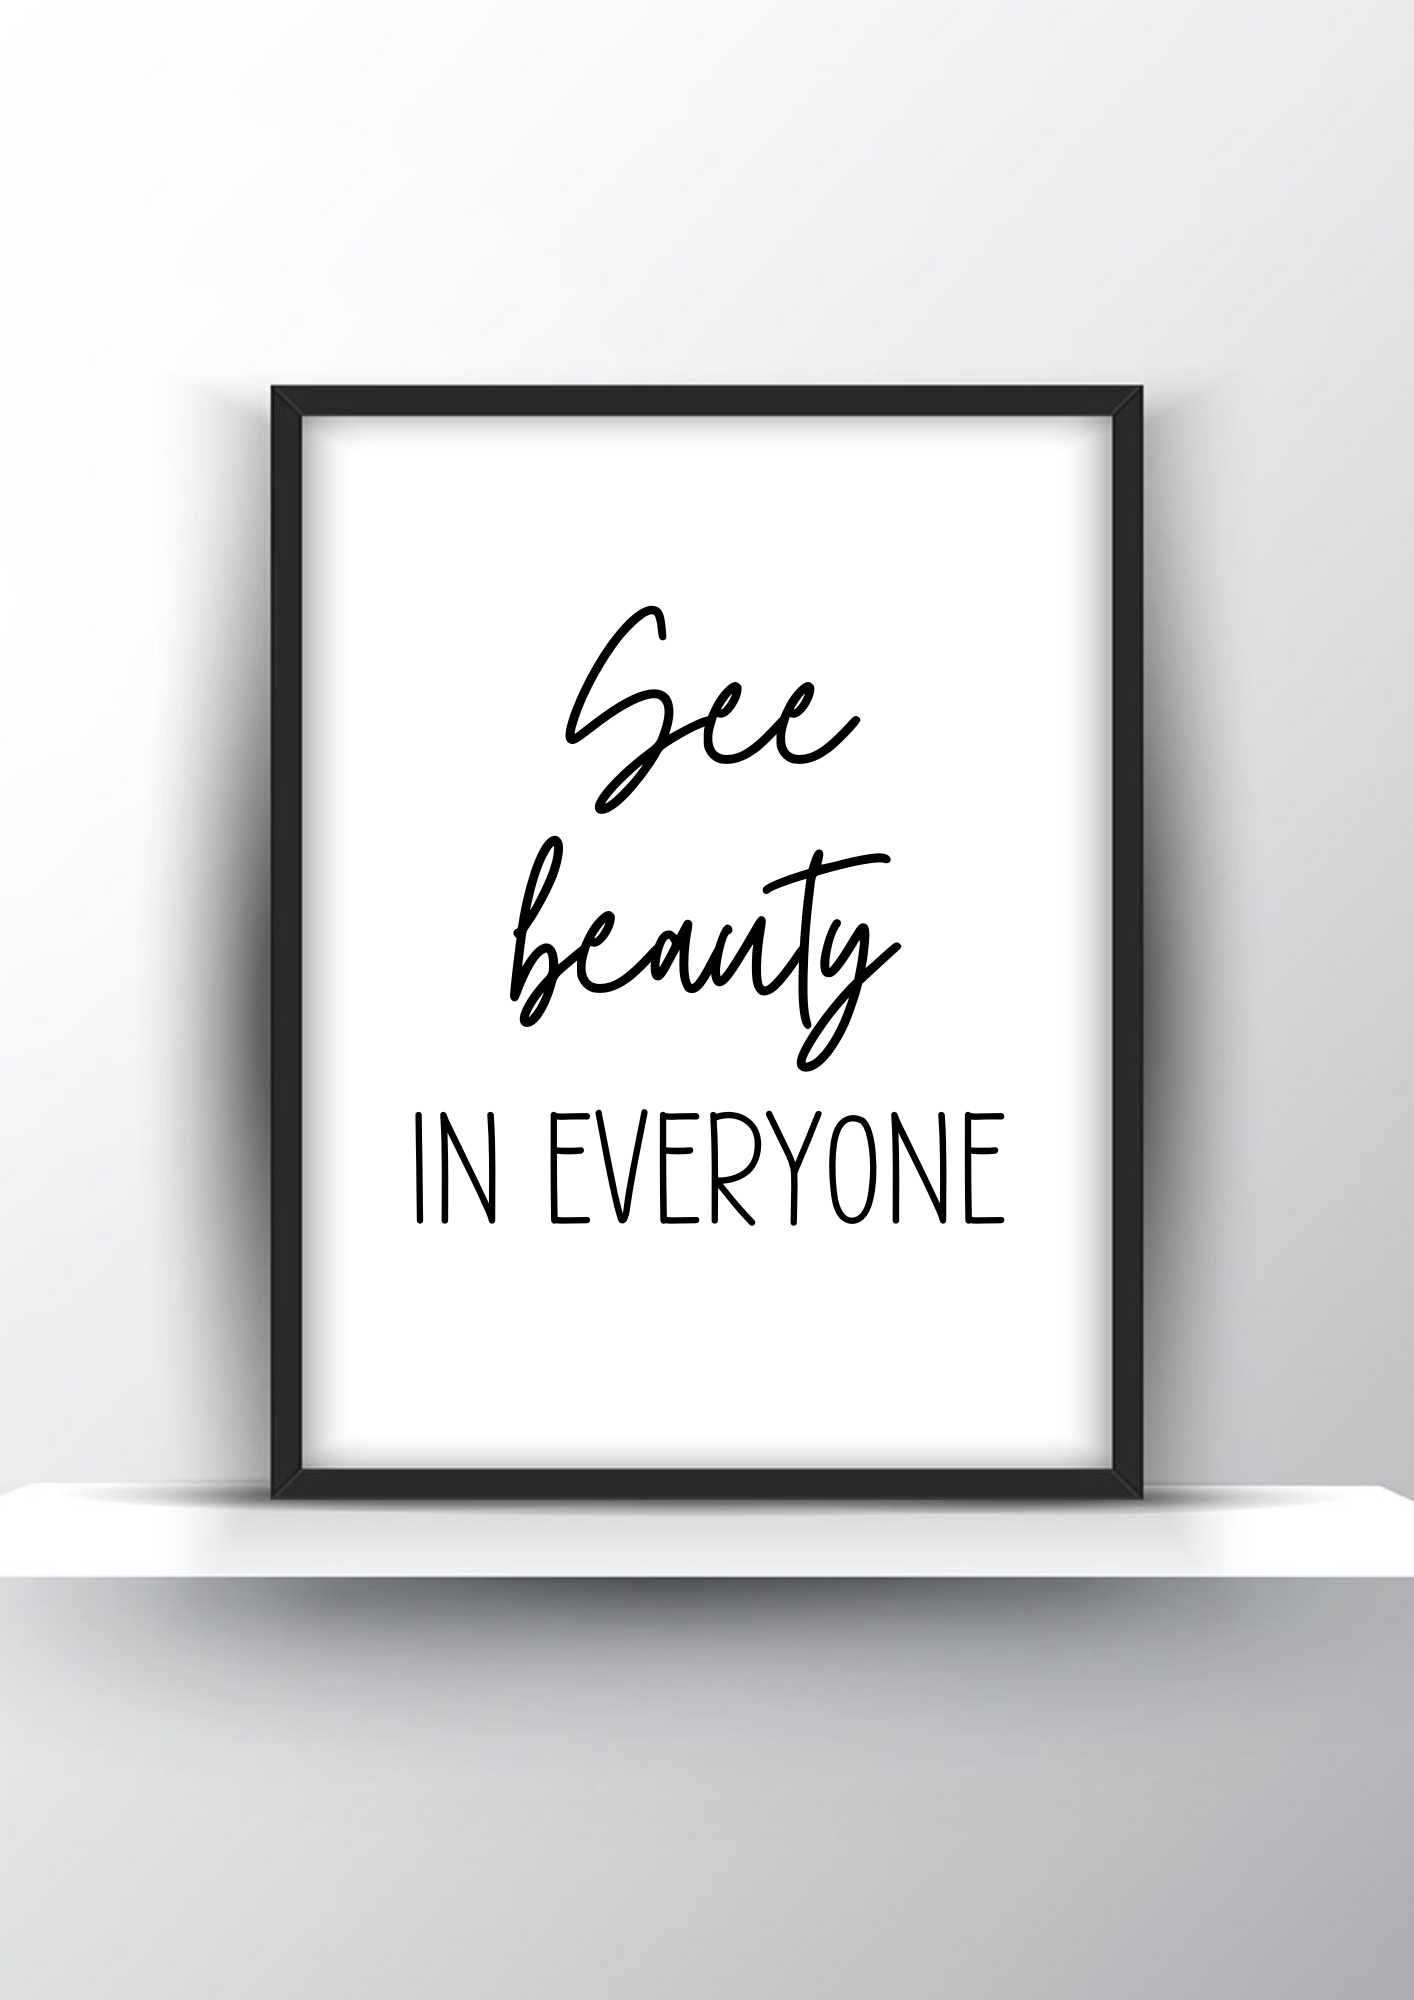 See Beauty In Everyone Printable Wall Art - Motivational Wall Art - Home Decor - Digital Download